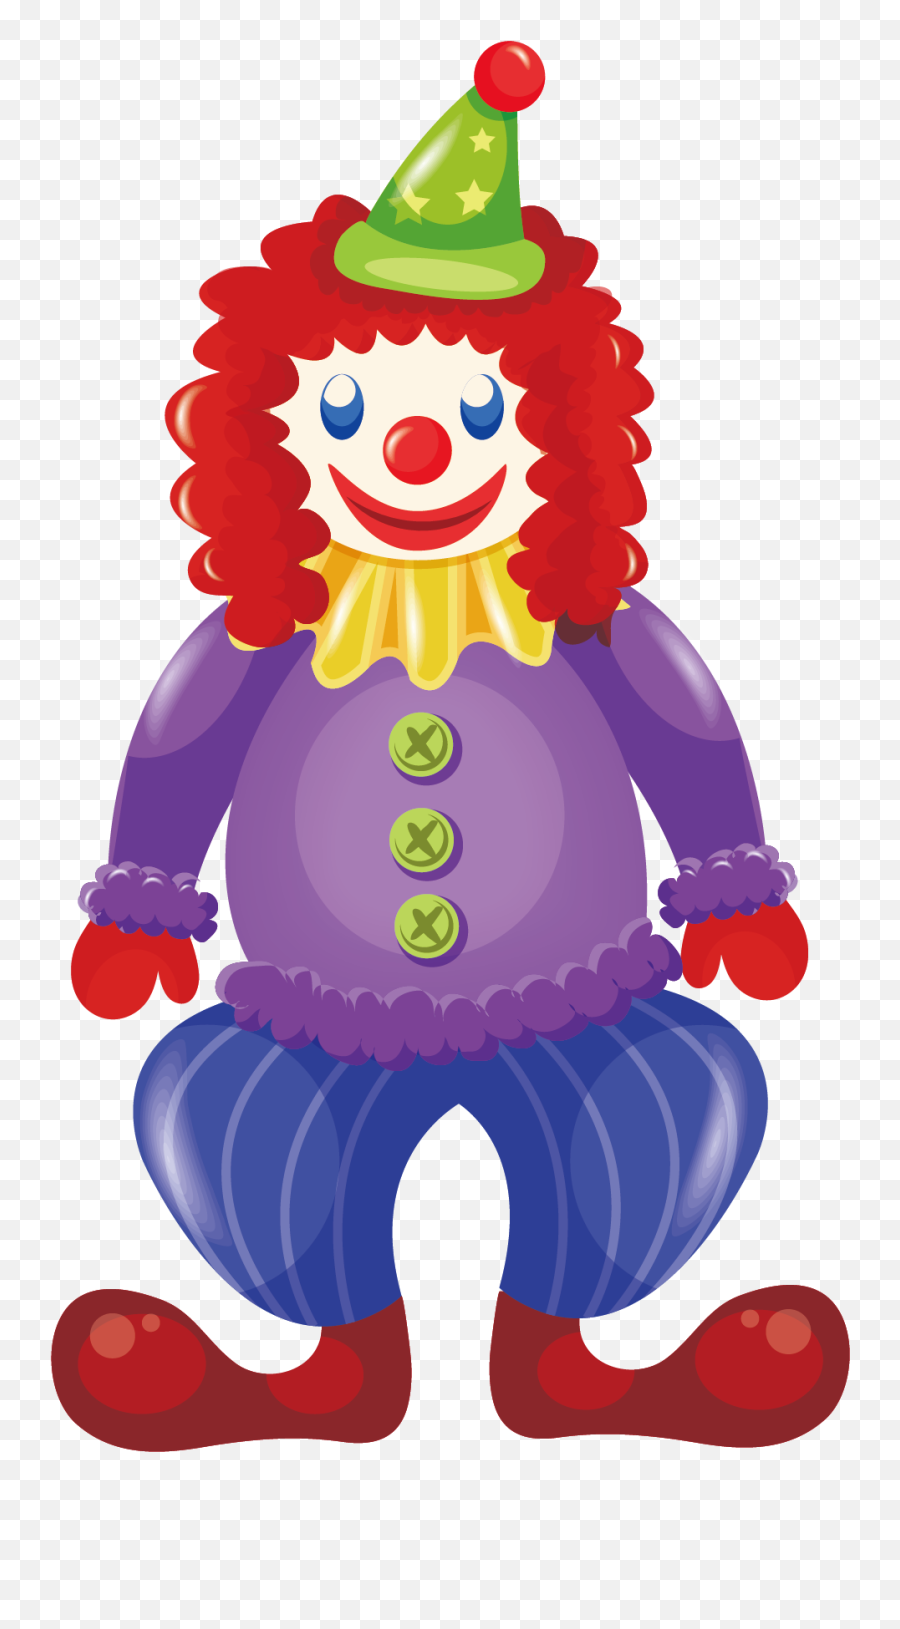 Free Png Download Clown Png Images Background Png Images - Free Pictures Of Female Clown Emoji,Dancing Twin Emoji